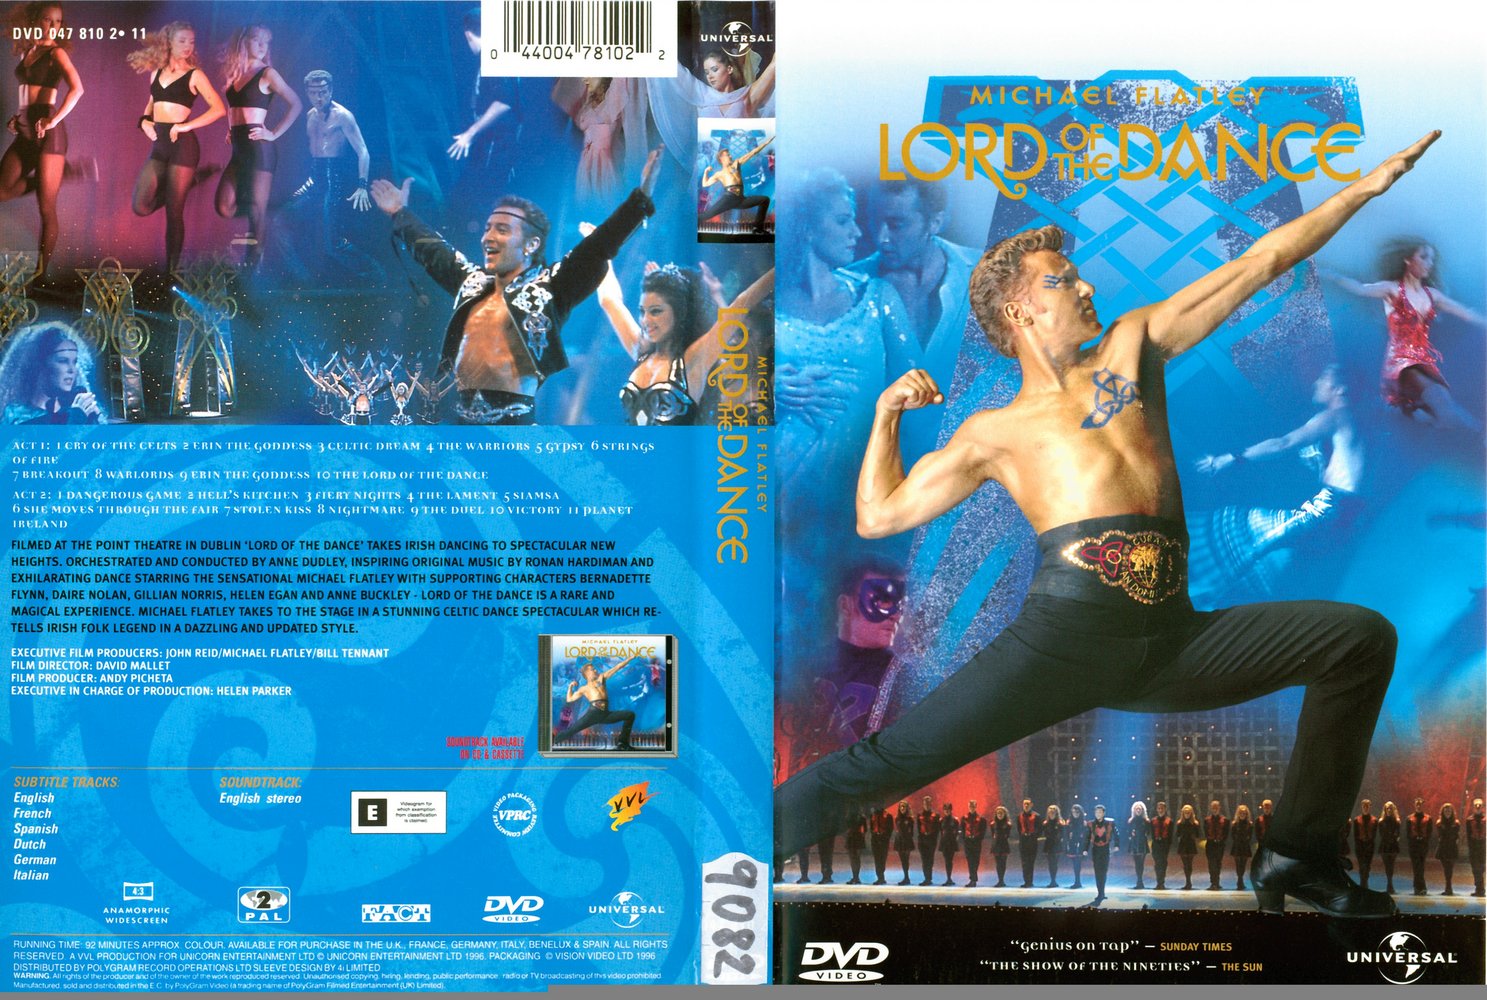 Jaquette DVD Michael Flatley lord f the dance